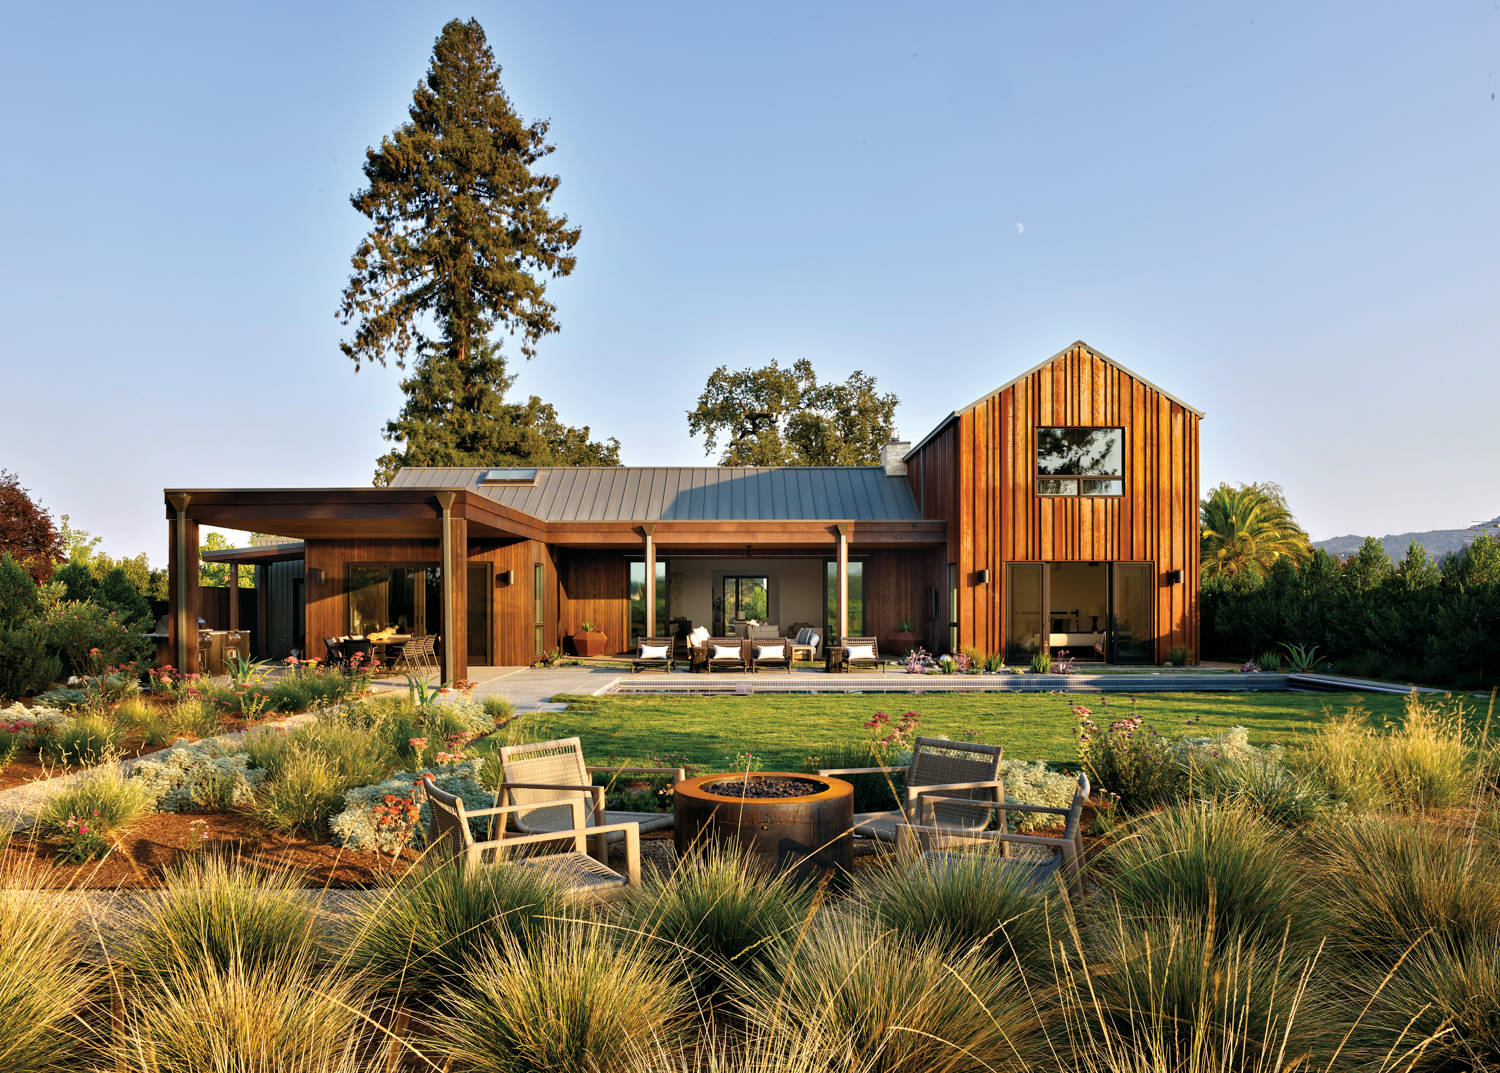 Tour A Modern Wine Country Retreat With Eco-Conscious Materials {Tour A Modern Wine Country Retreat With Eco-Conscious Materials} – English